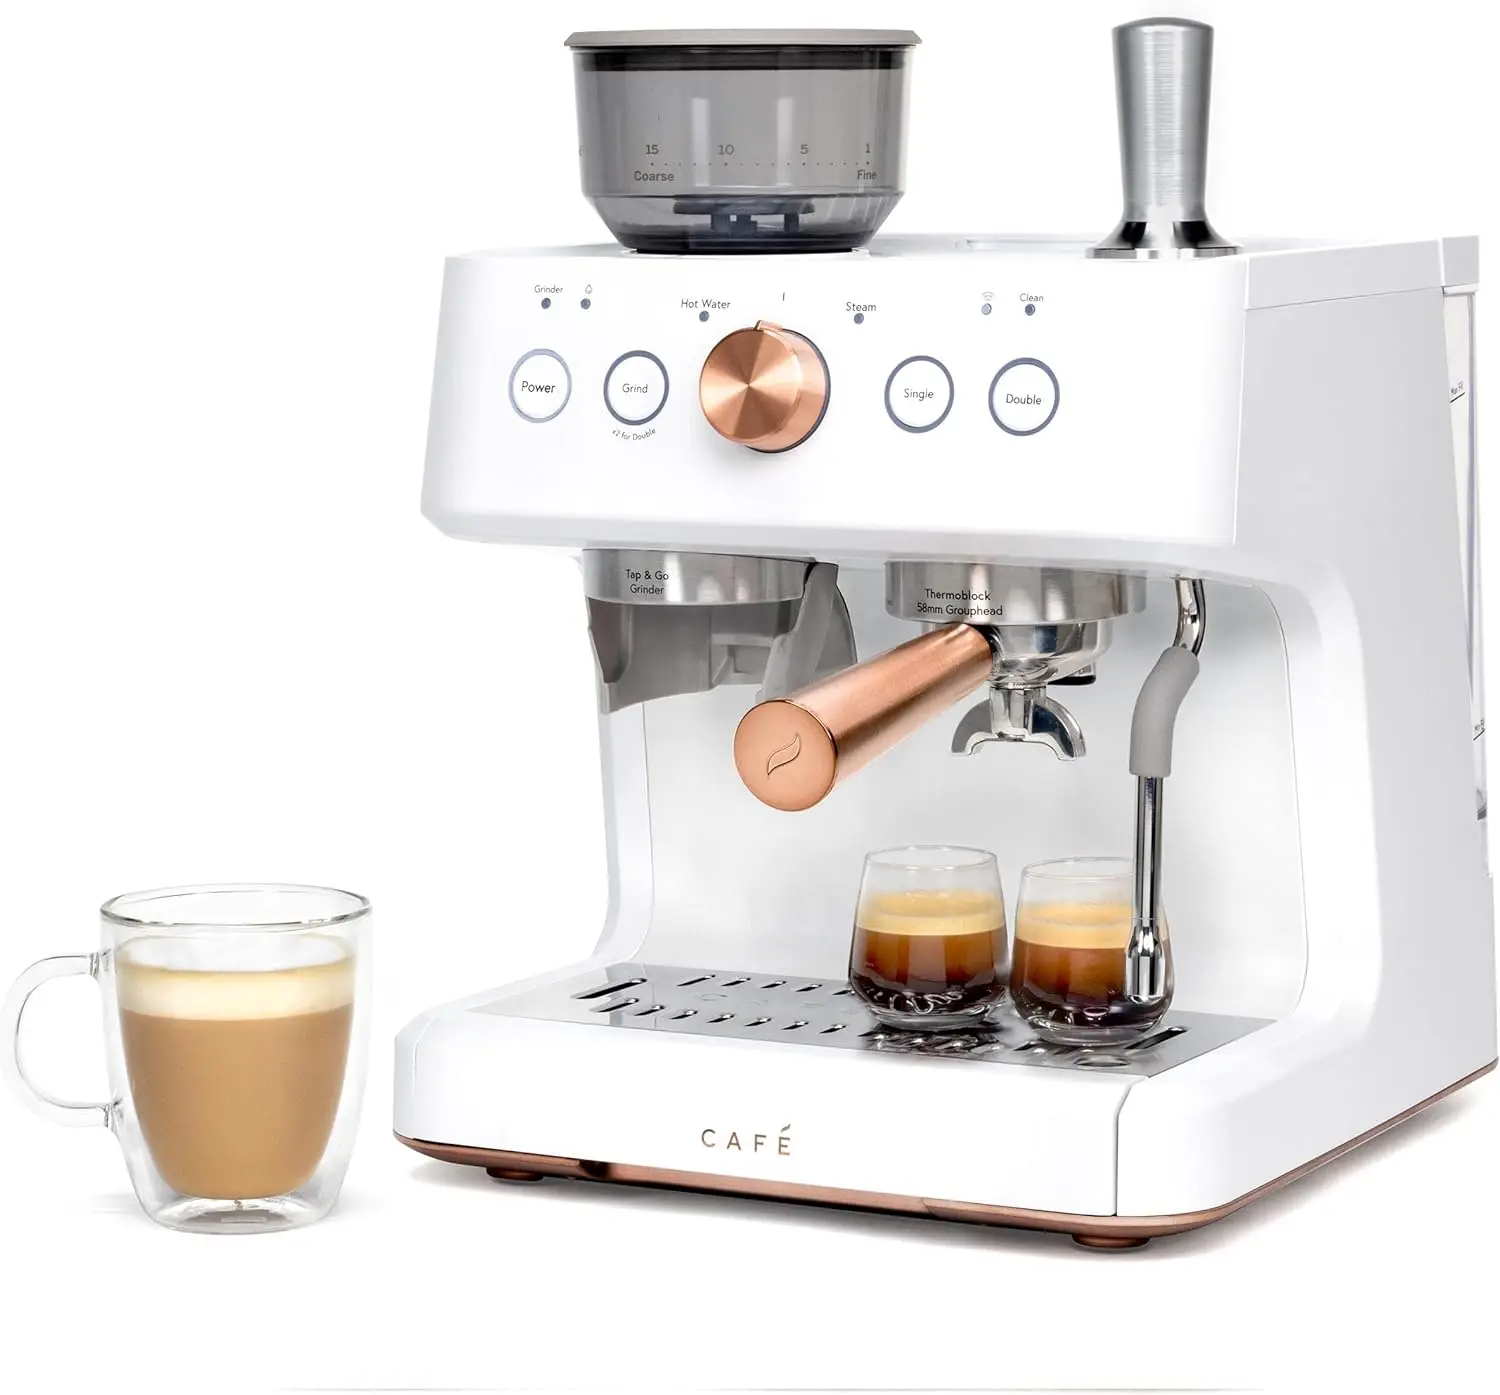 

Café Bellissimo Semi Automatic Espresso Machine + Milk Frother | WiFi Connected, Smart Home Kitchen Essentials | Built-In Bean